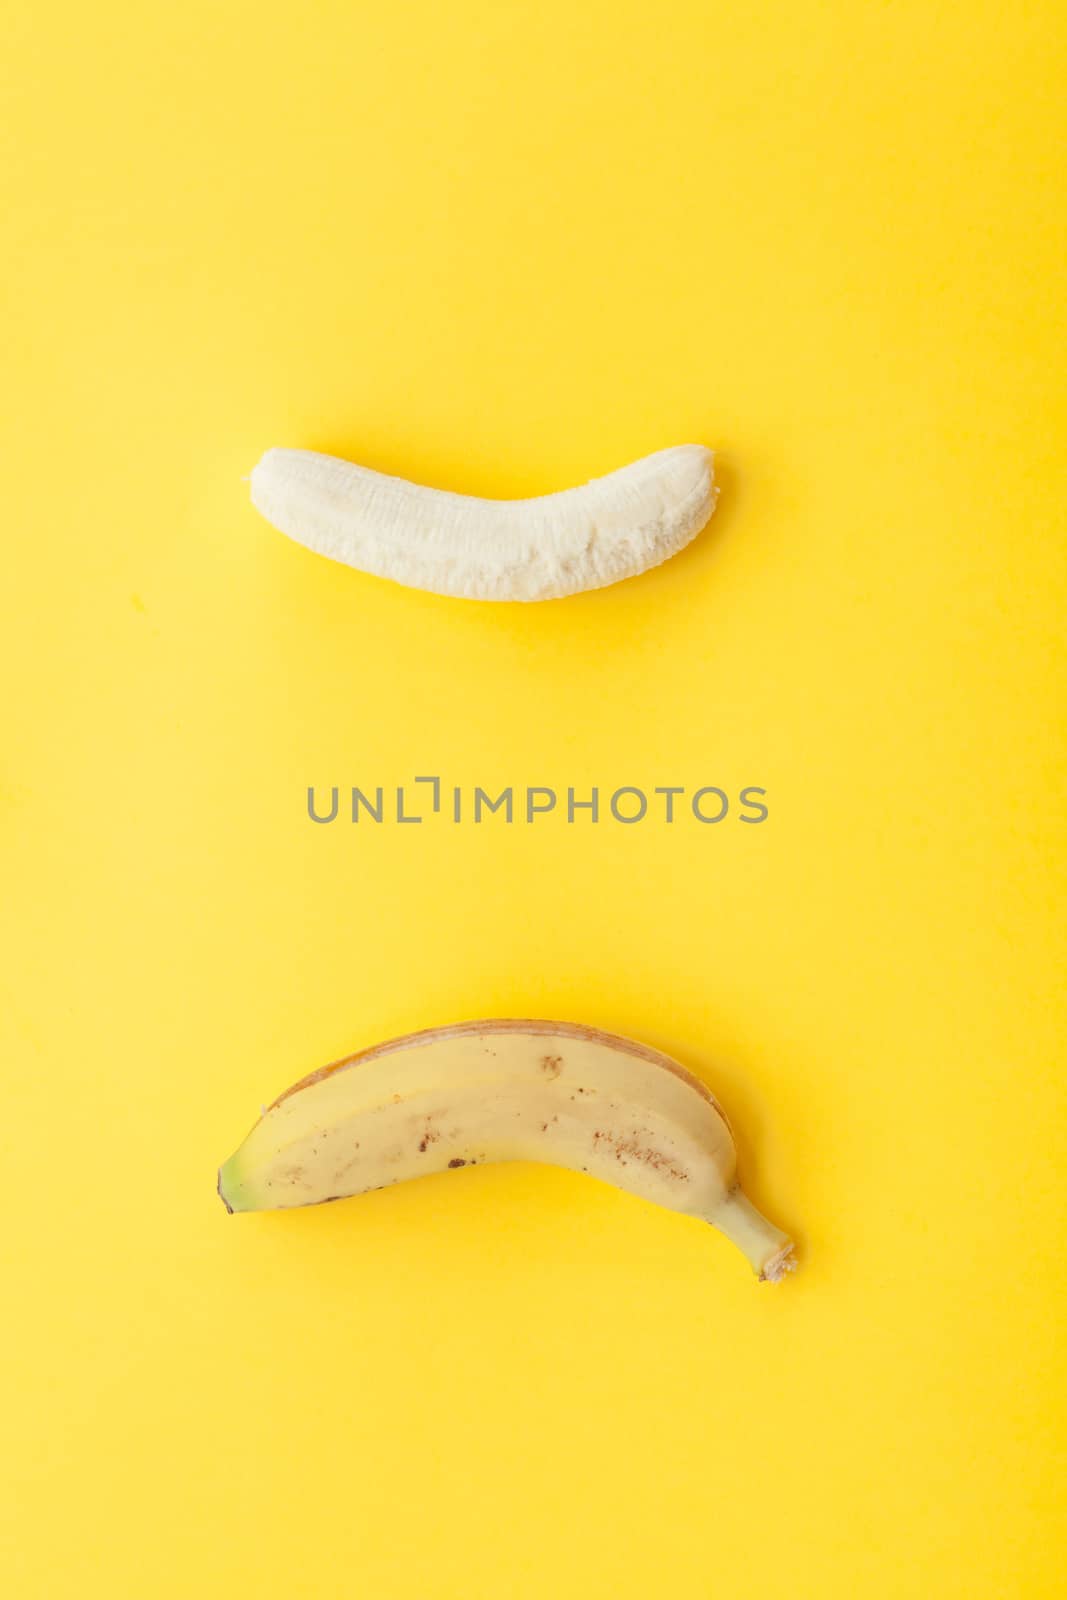 Peel banana and fruit on a yellow background by andongob